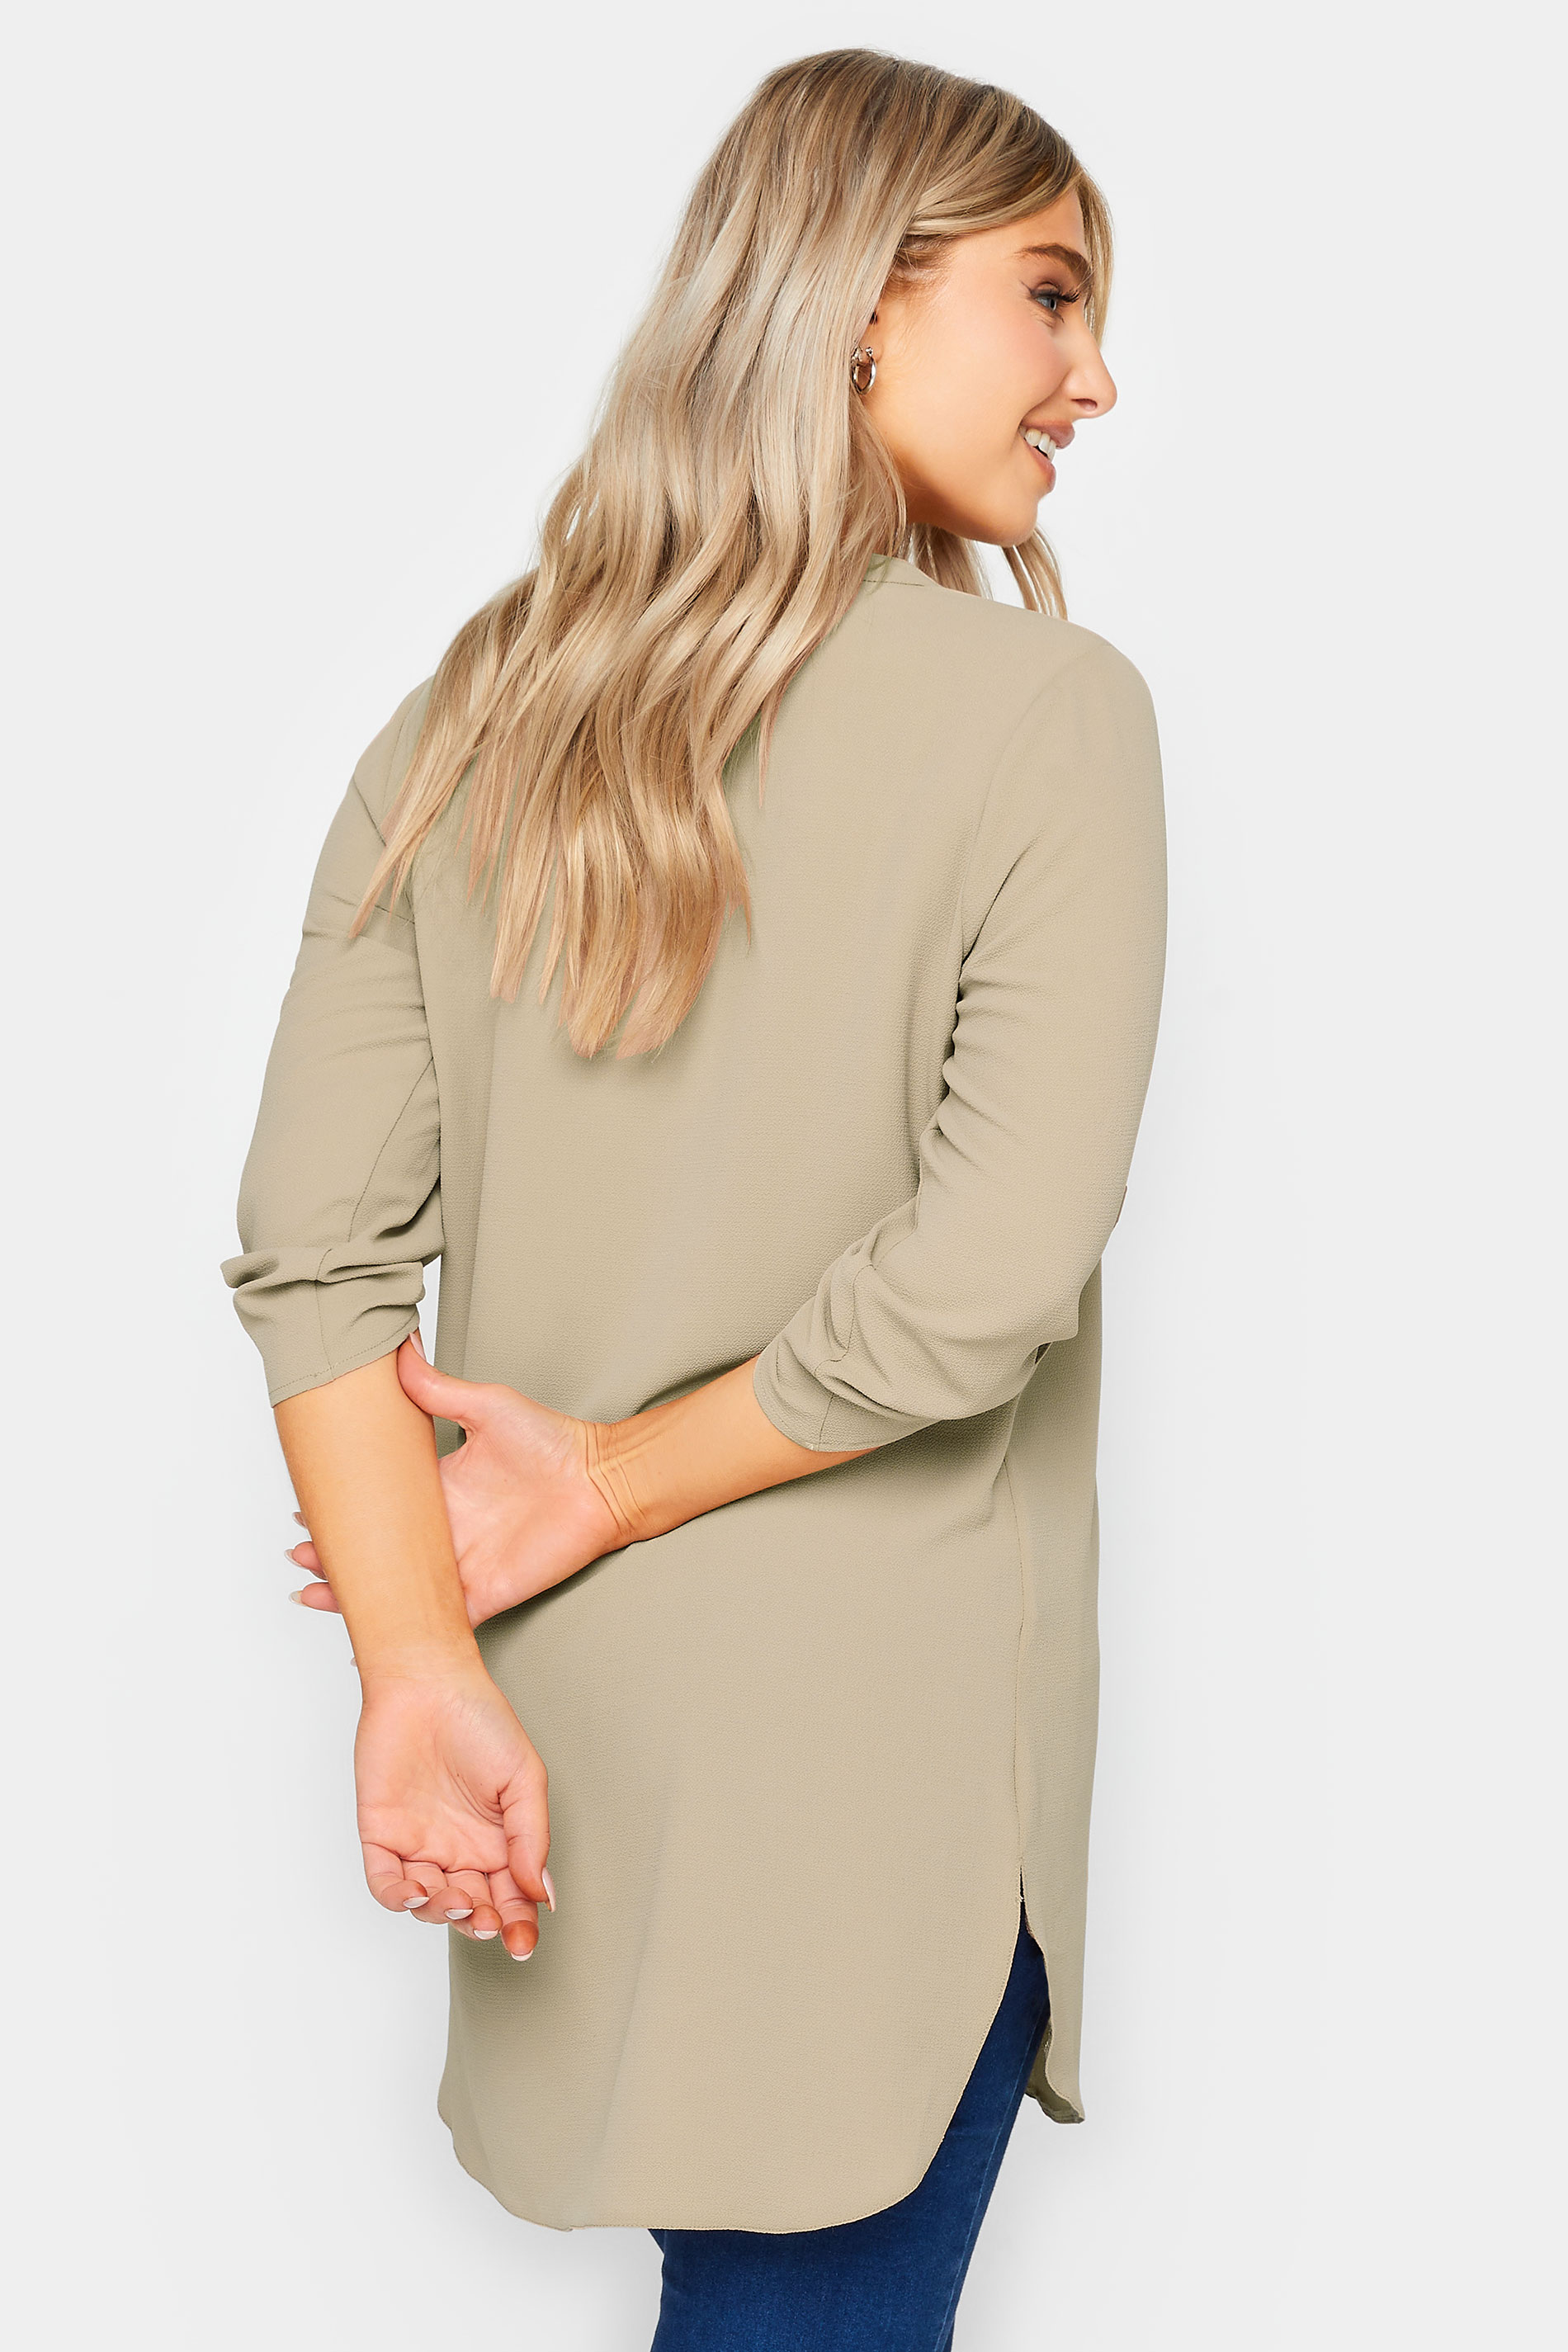 M&Co Natural Brown Long Sleeve Button Blouse | M&Co 3